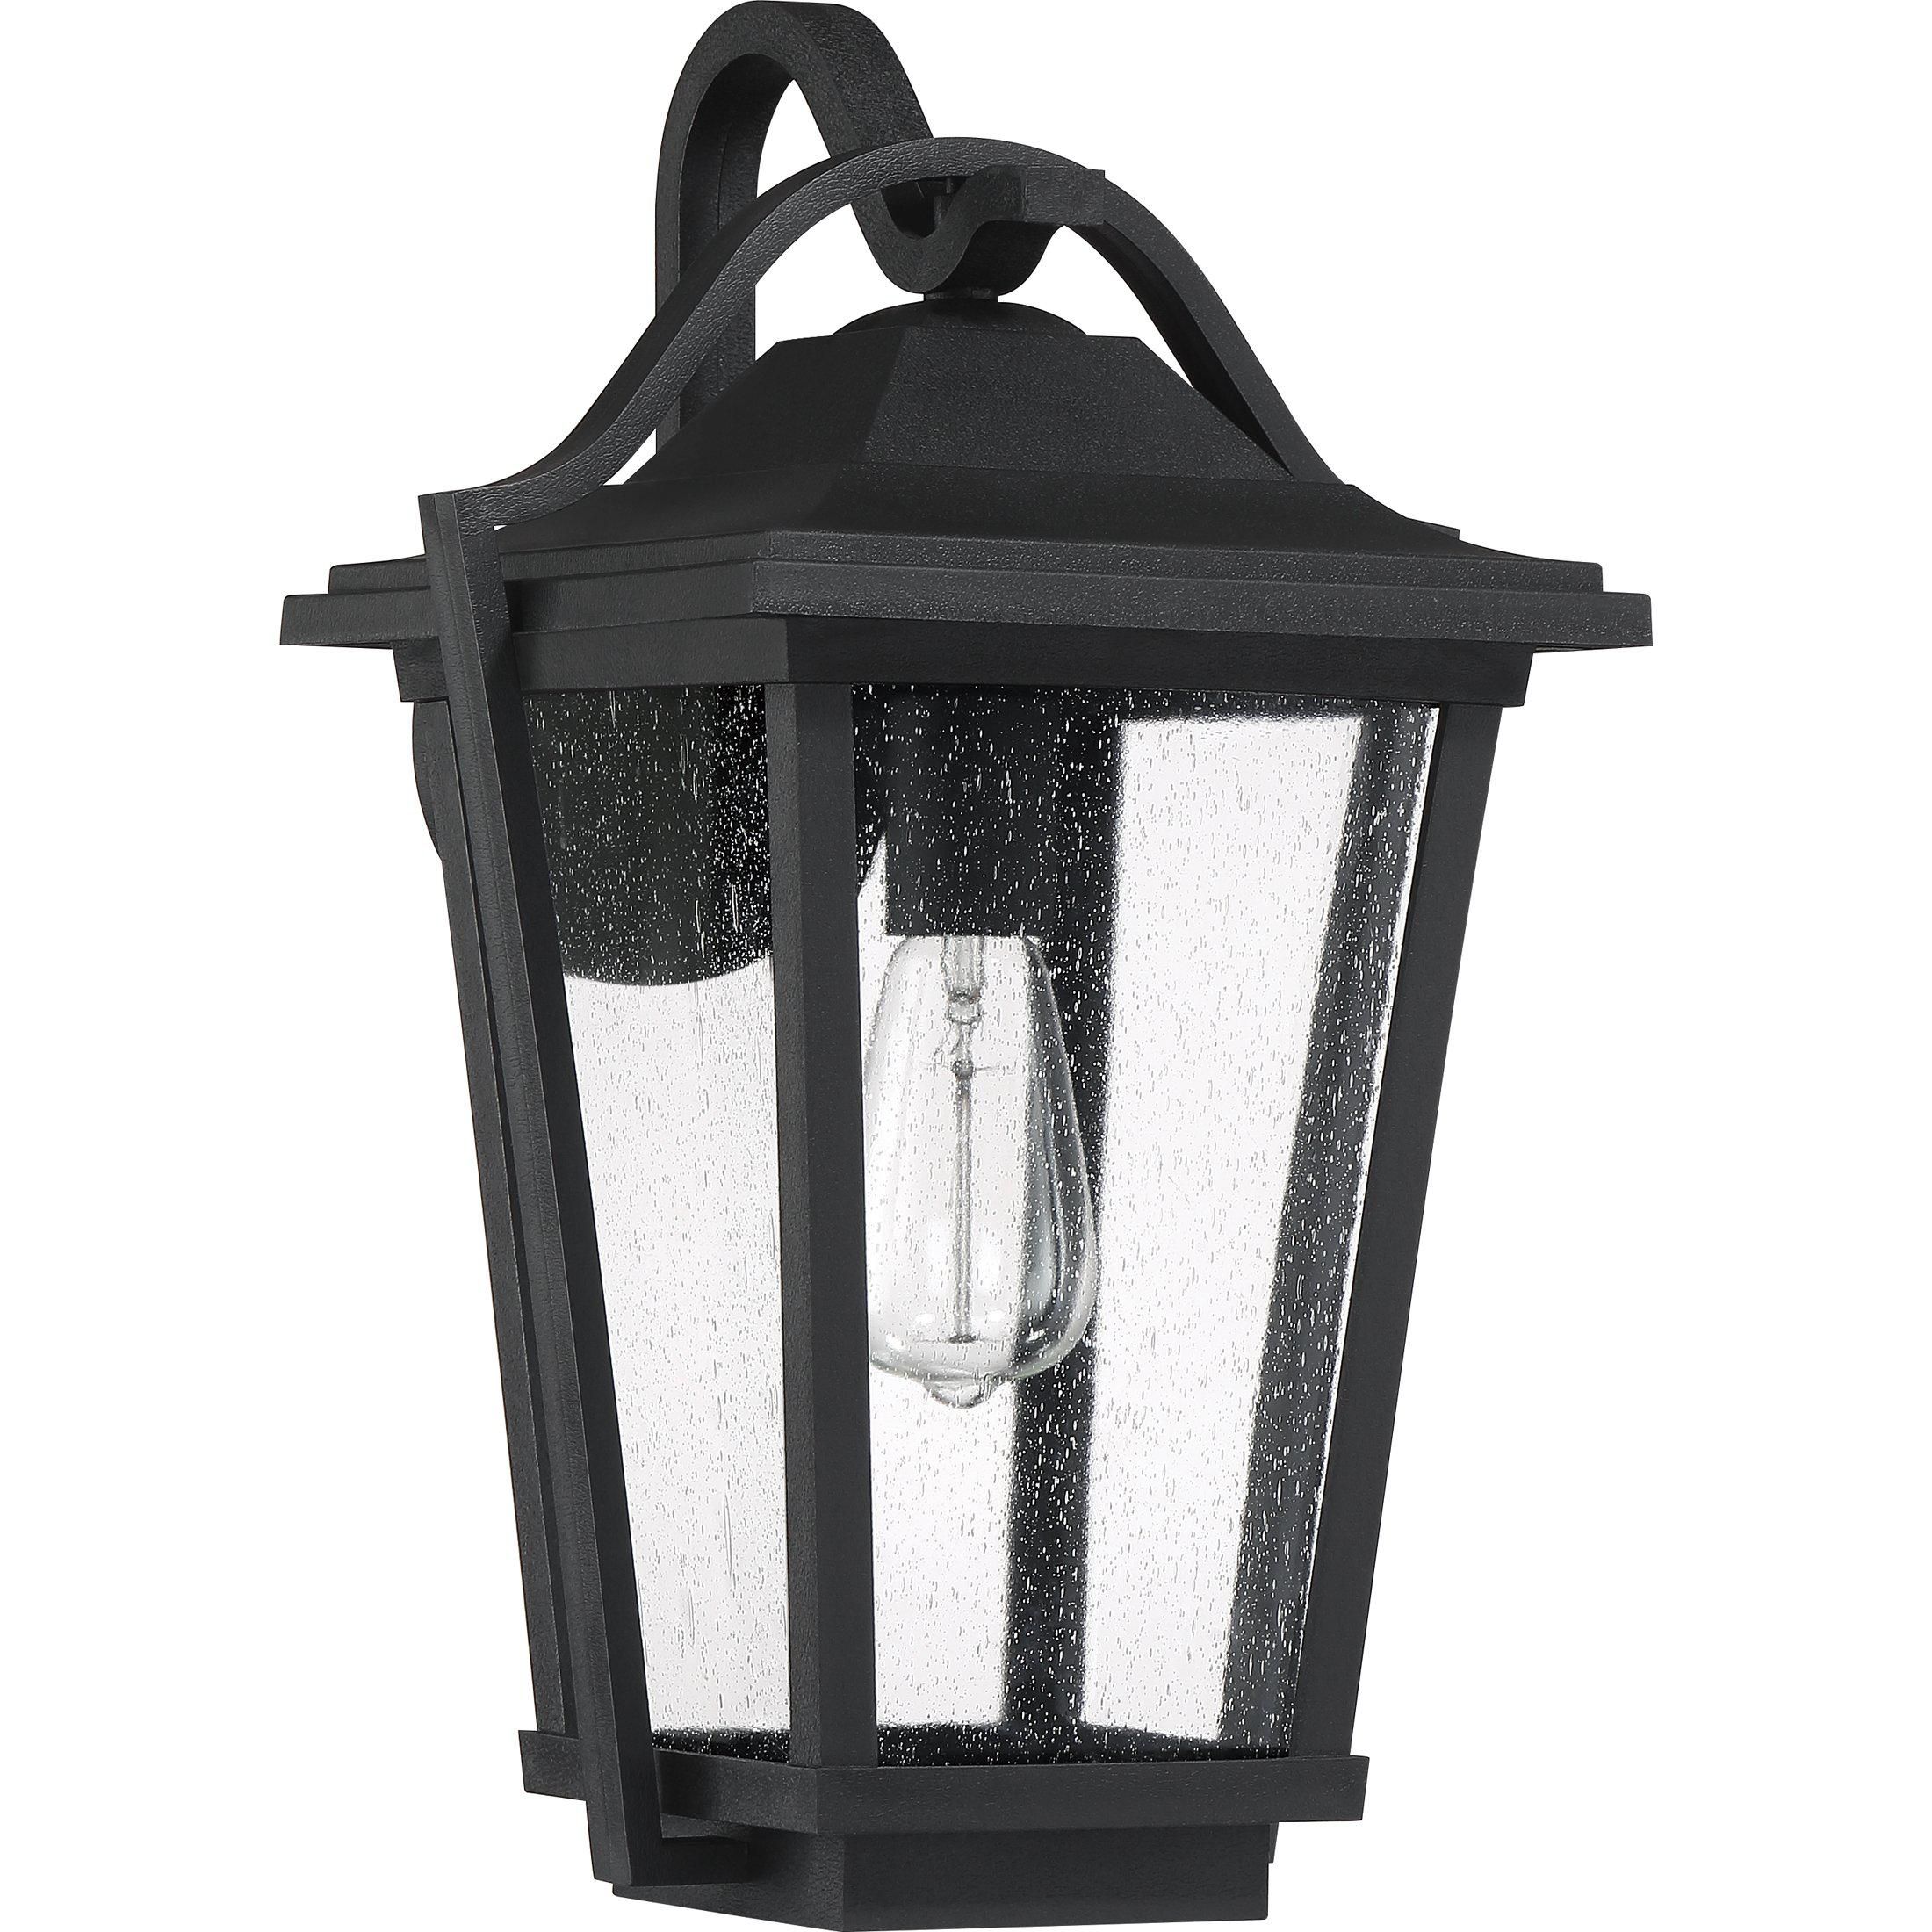 Quoizel  Darius Outdoor Lantern, Large Outdoor l Wall Quoizel   